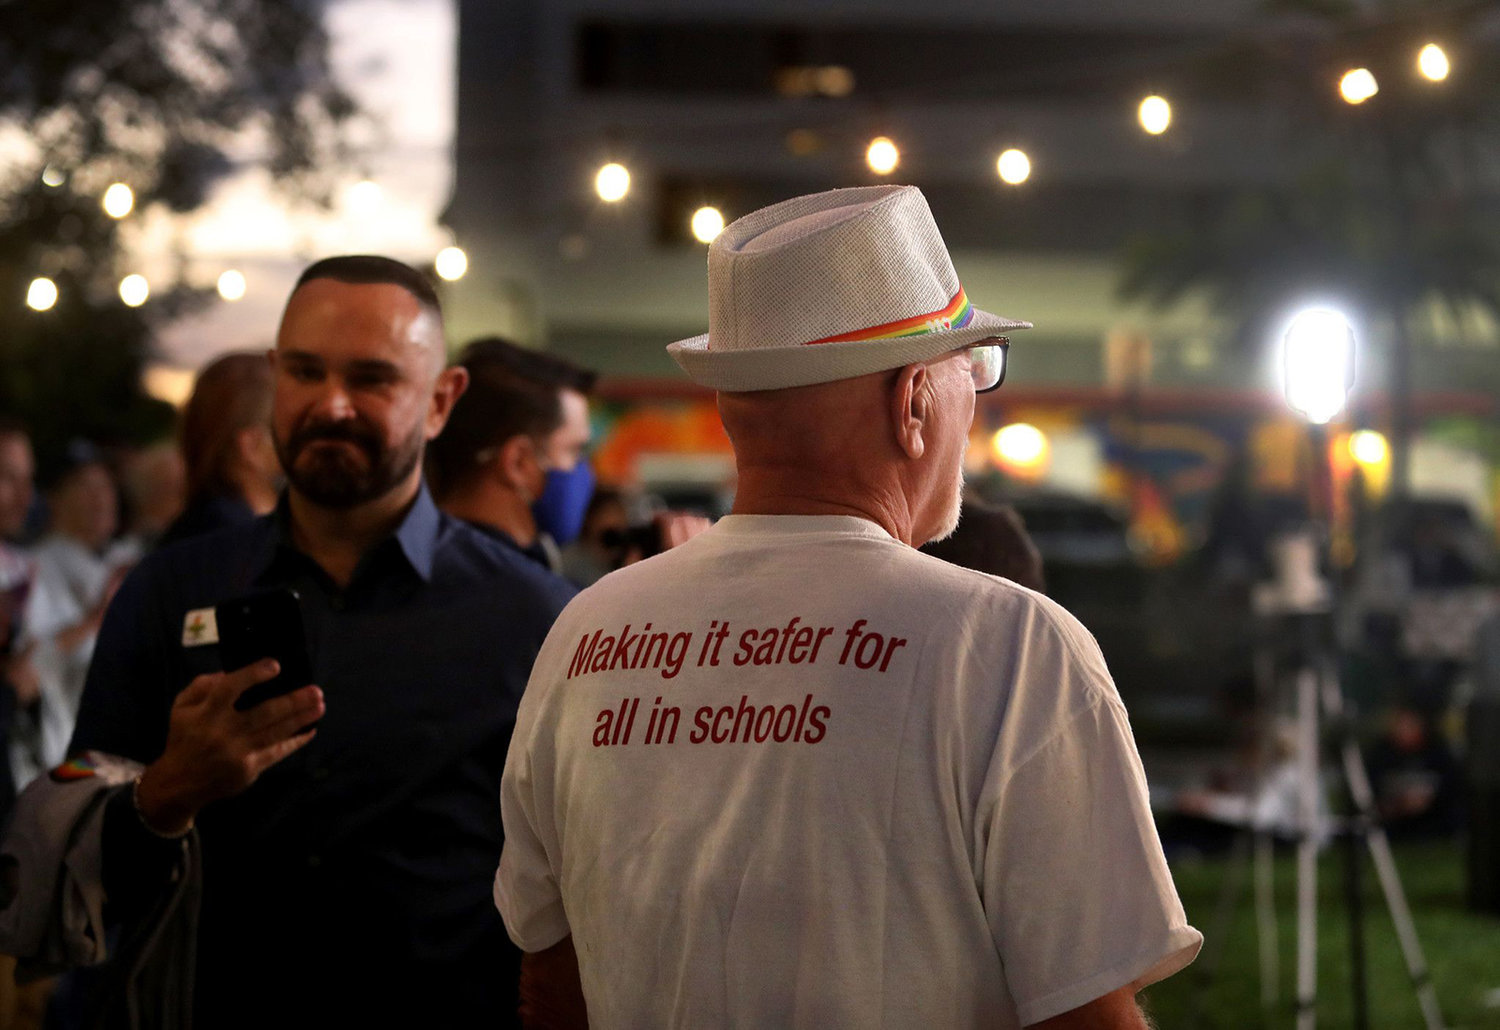 Tom Lander, a former teacher, and the chair of Safe Schools South Florida, at a rally to push back against the so-called "Don't Say Gay" bill (HB 1557/SB 1834) at the Pride Center in Wilton Manors on Tuesday, Feb. 2, 2022. The bill would ban classroom discussions related to sexual orientation and gender identity in schools. (Mike Stocker/Sun Sentinel/TNS)